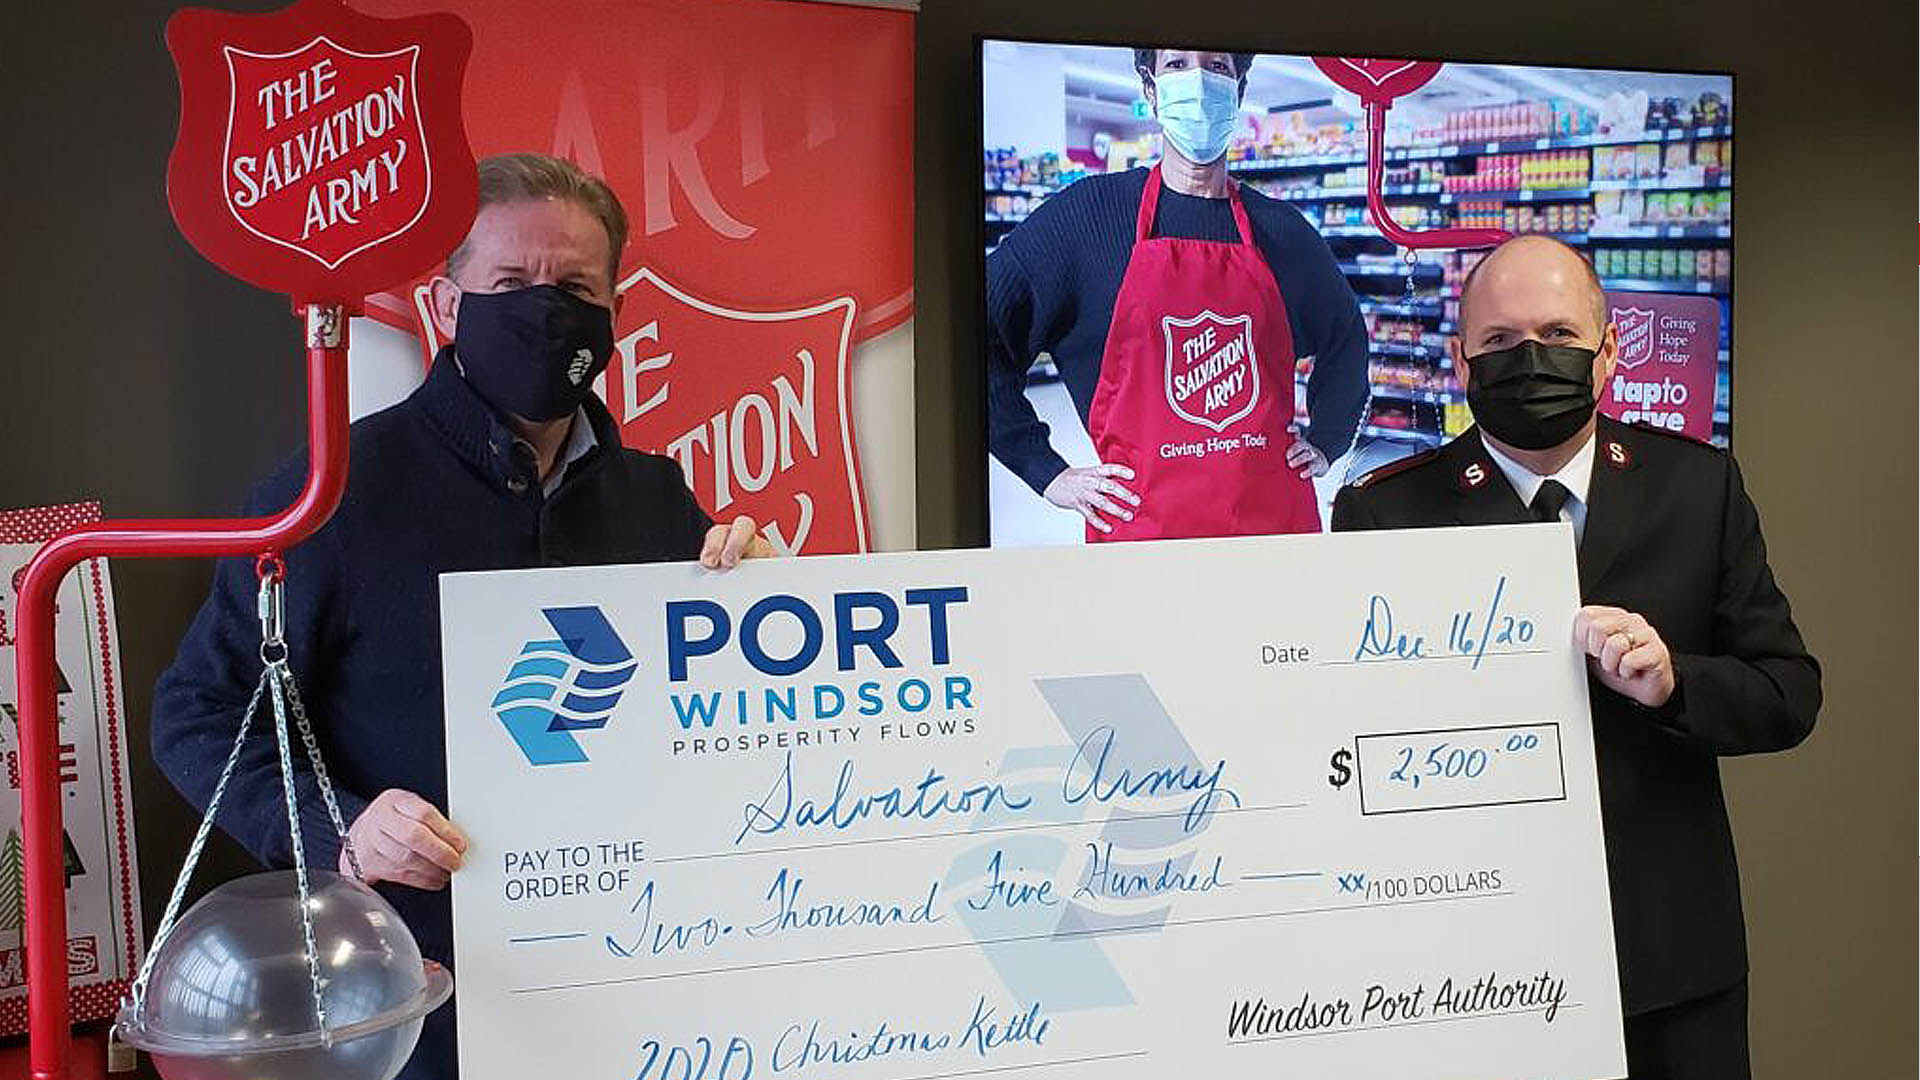 Media Release: The Salvation Army Red Kettle Donation